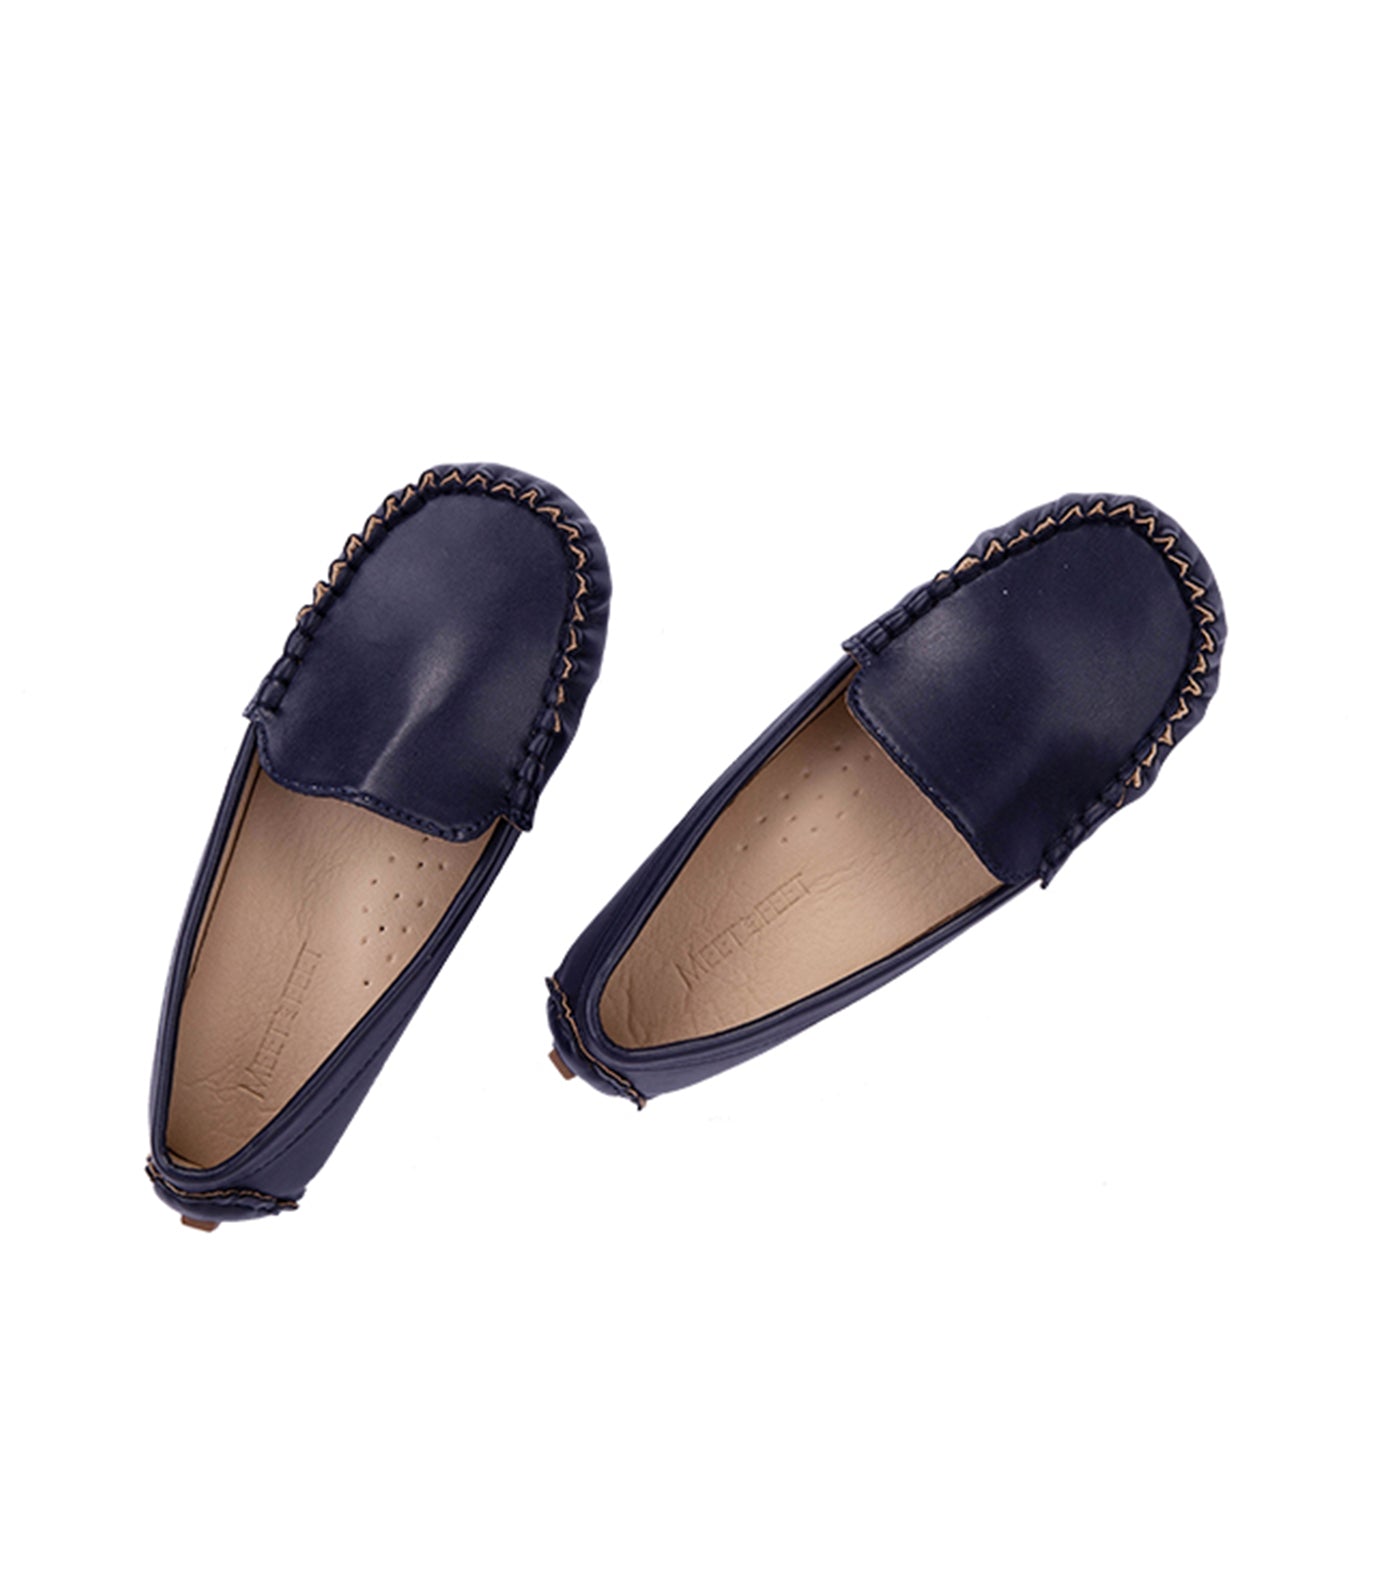 Seth Kids Loafers for Boys - Navy Blue